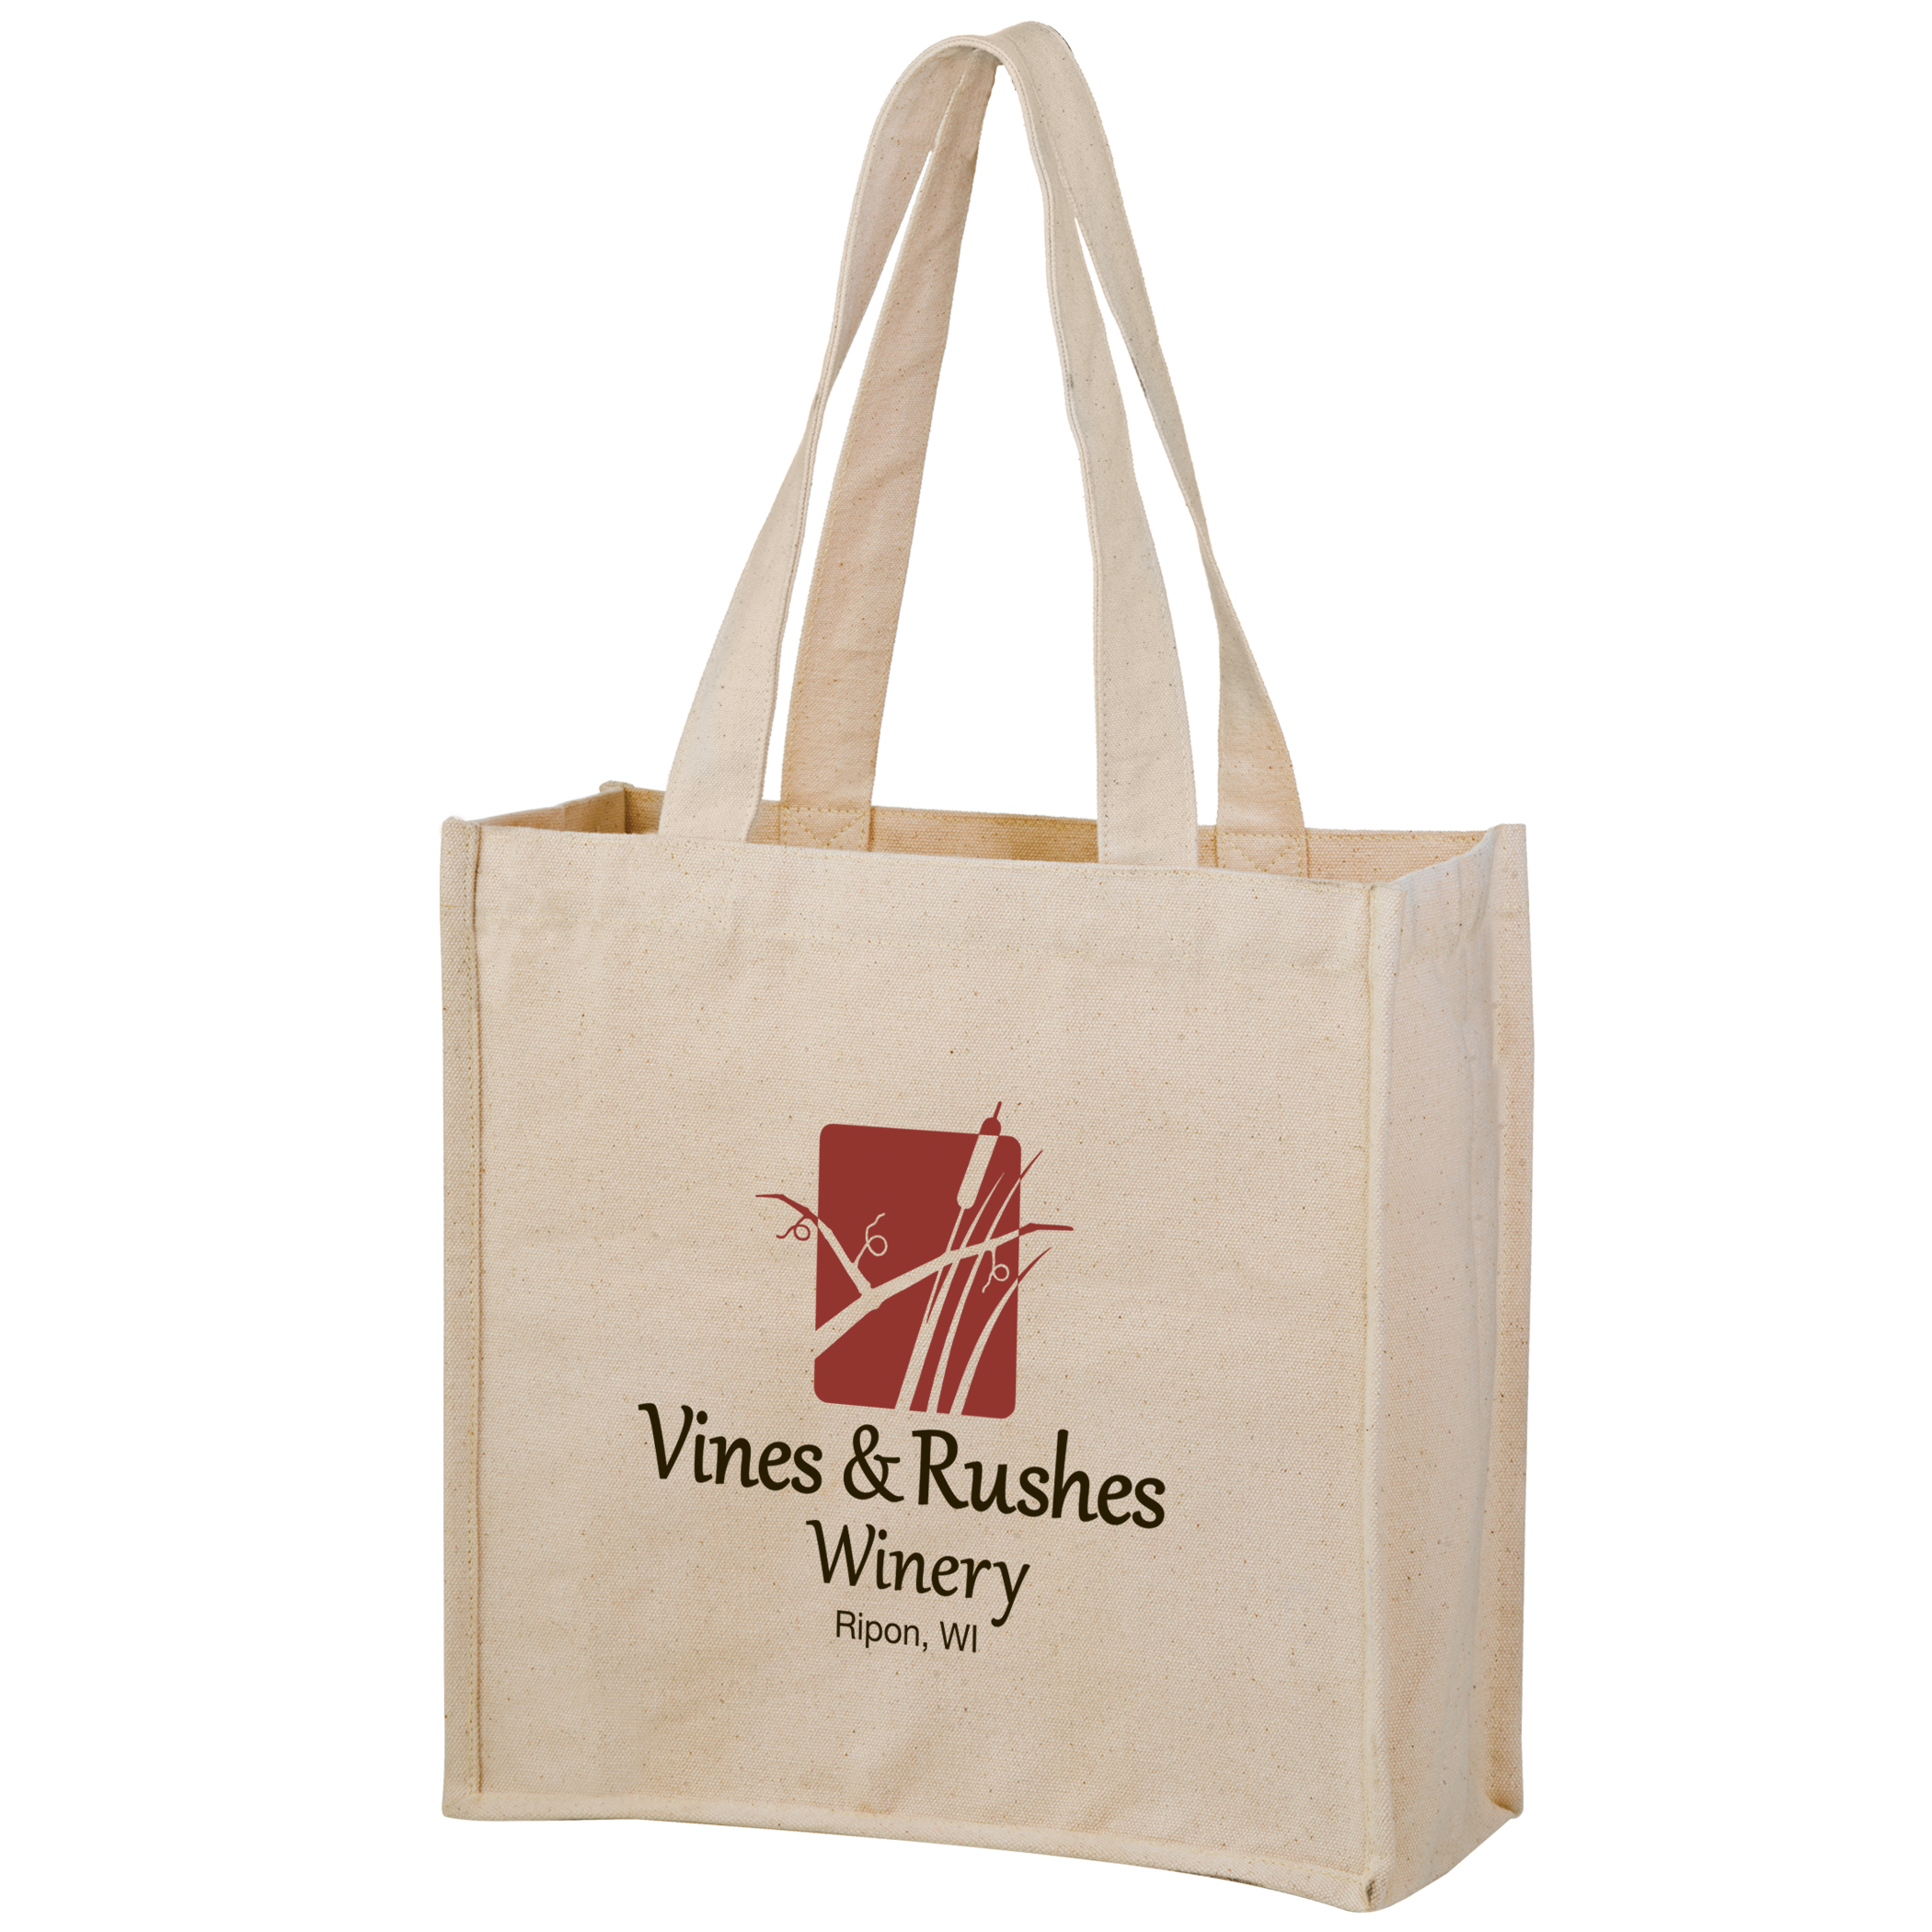 Heavyweight Cotton Tote Bag With 2 Bottle Holders | Cotton Tote Bags